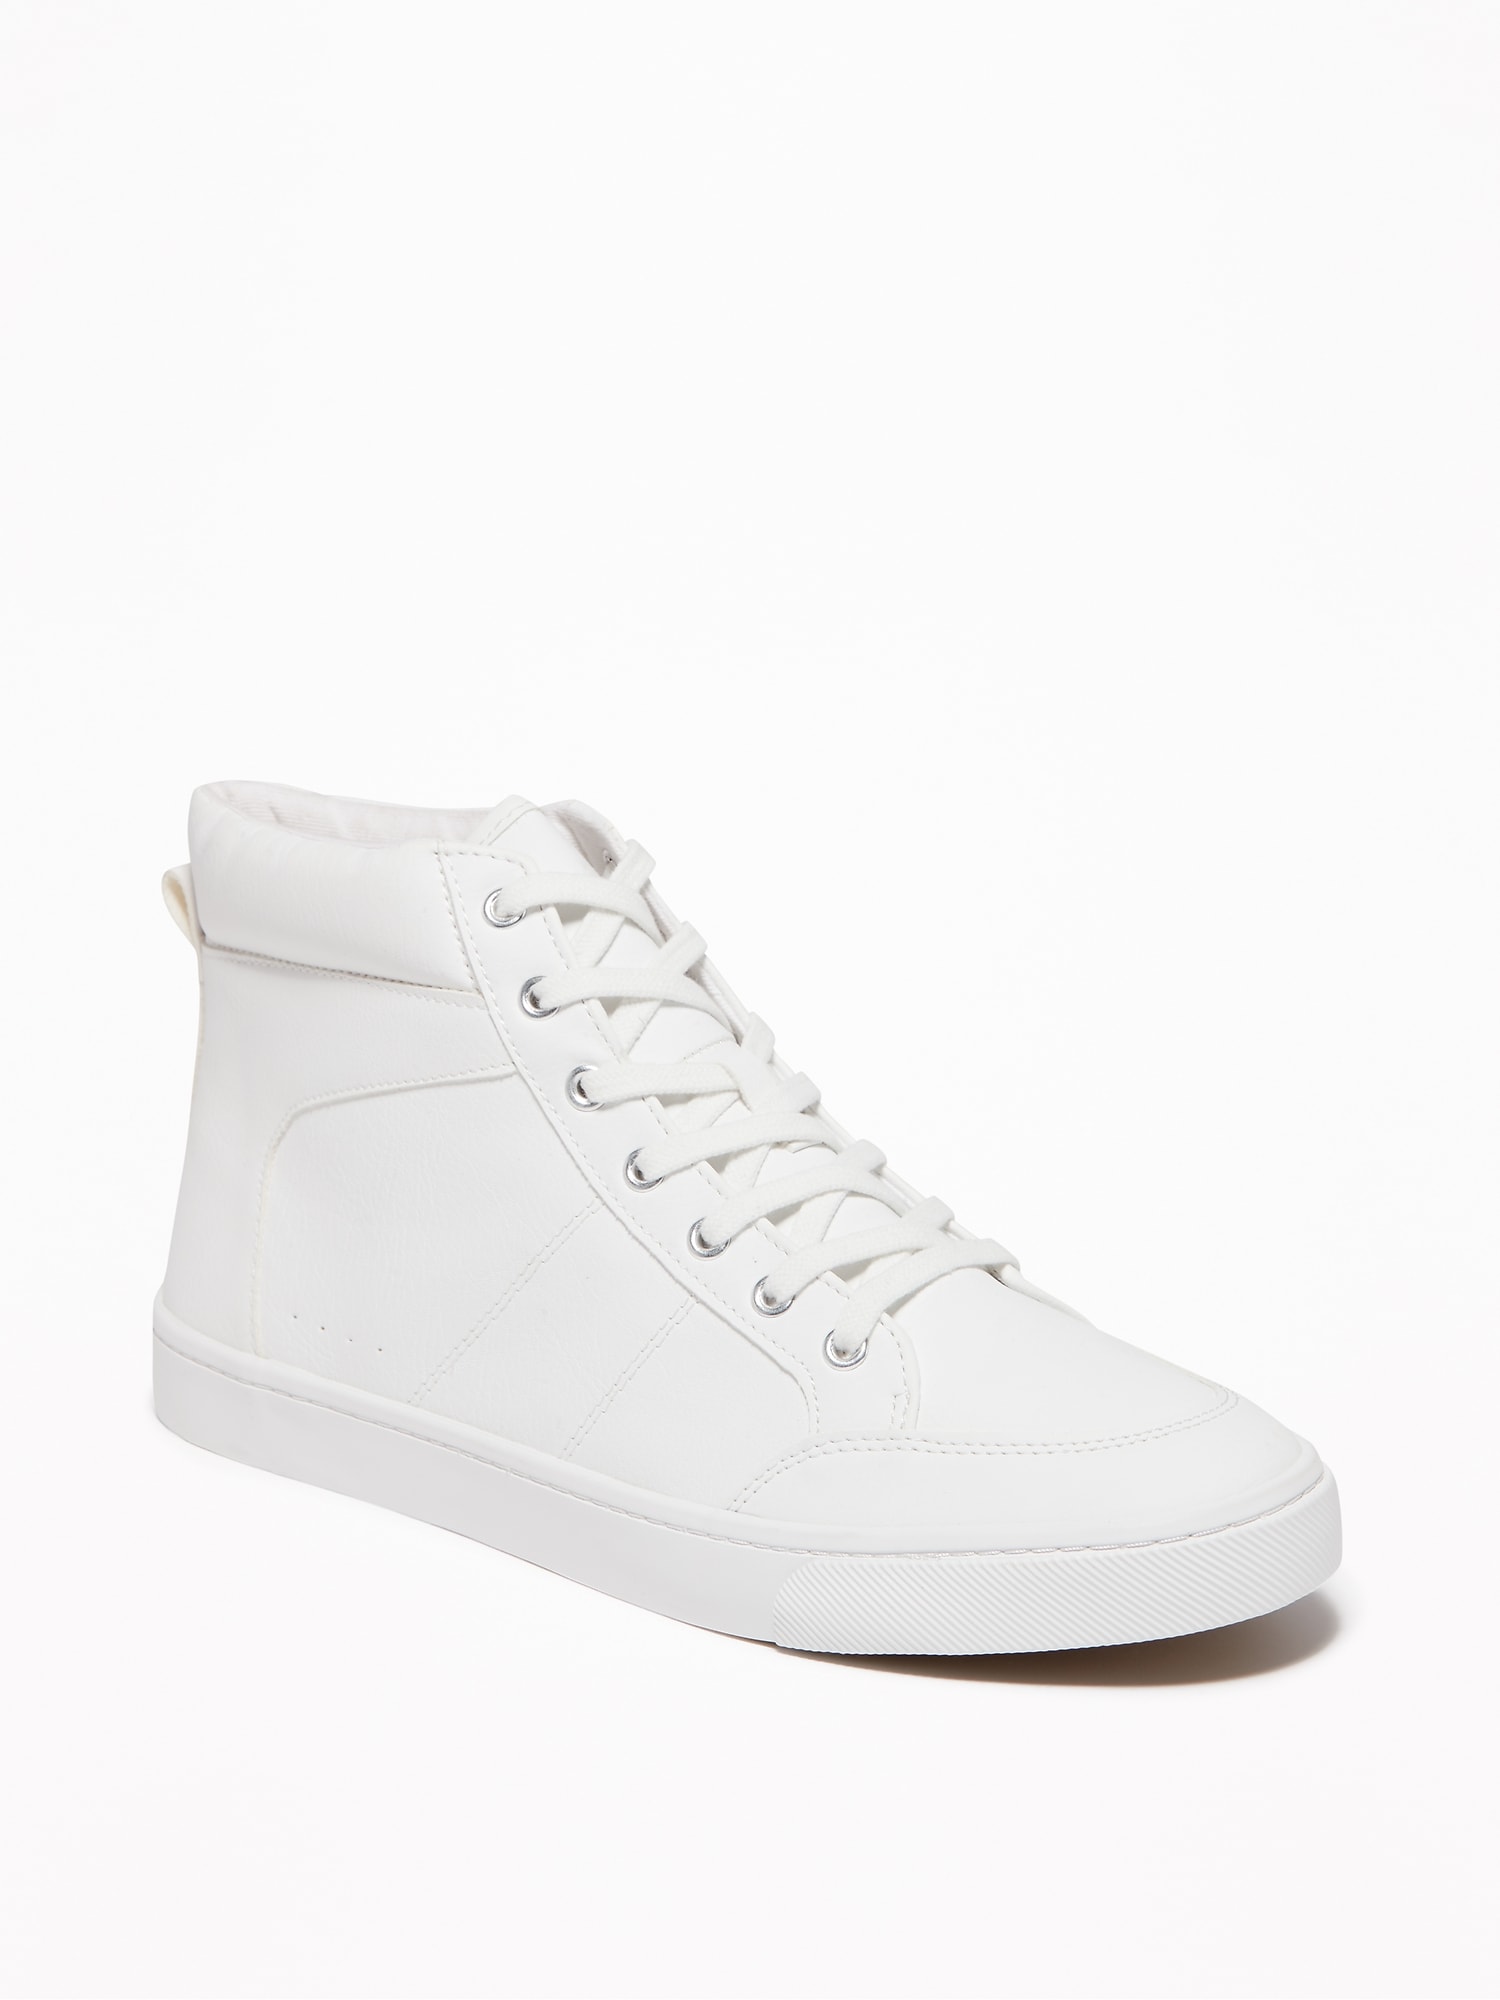 women's white faux leather sneakers